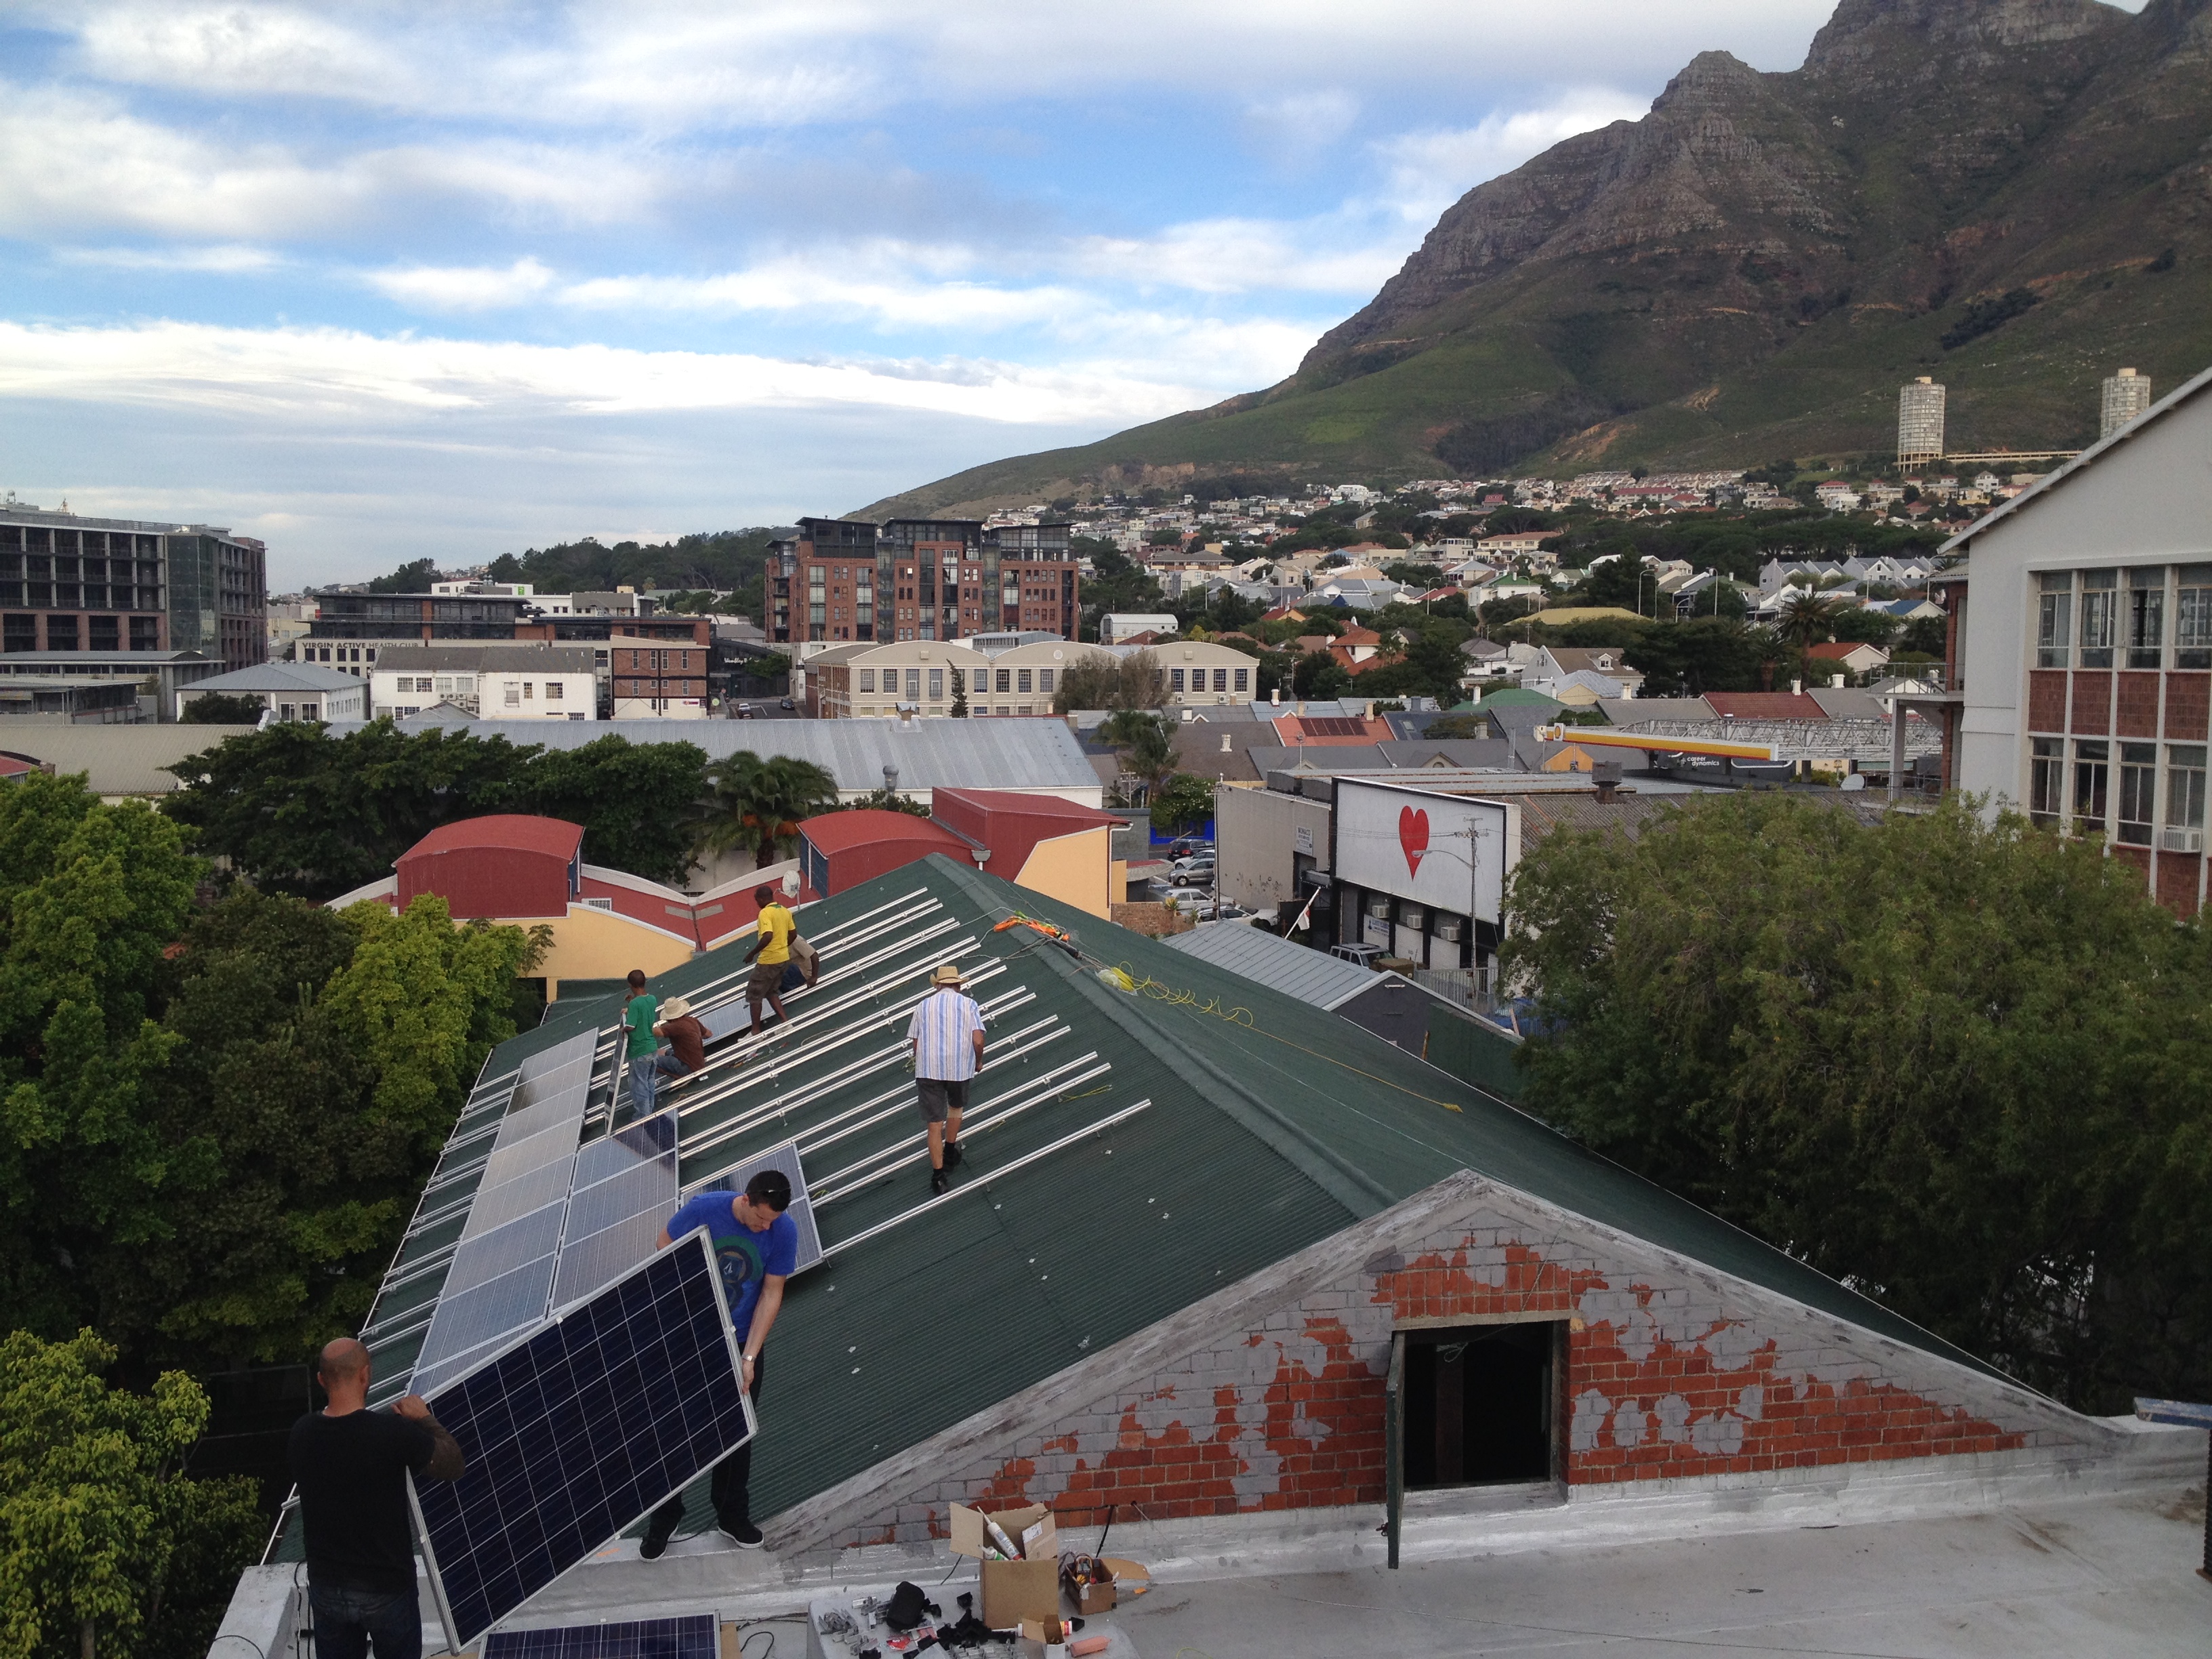 Cape Town is the rst South African city with a feed-in tariff for businesses and households that generate their own electricity through photovoltaic (PV) panels